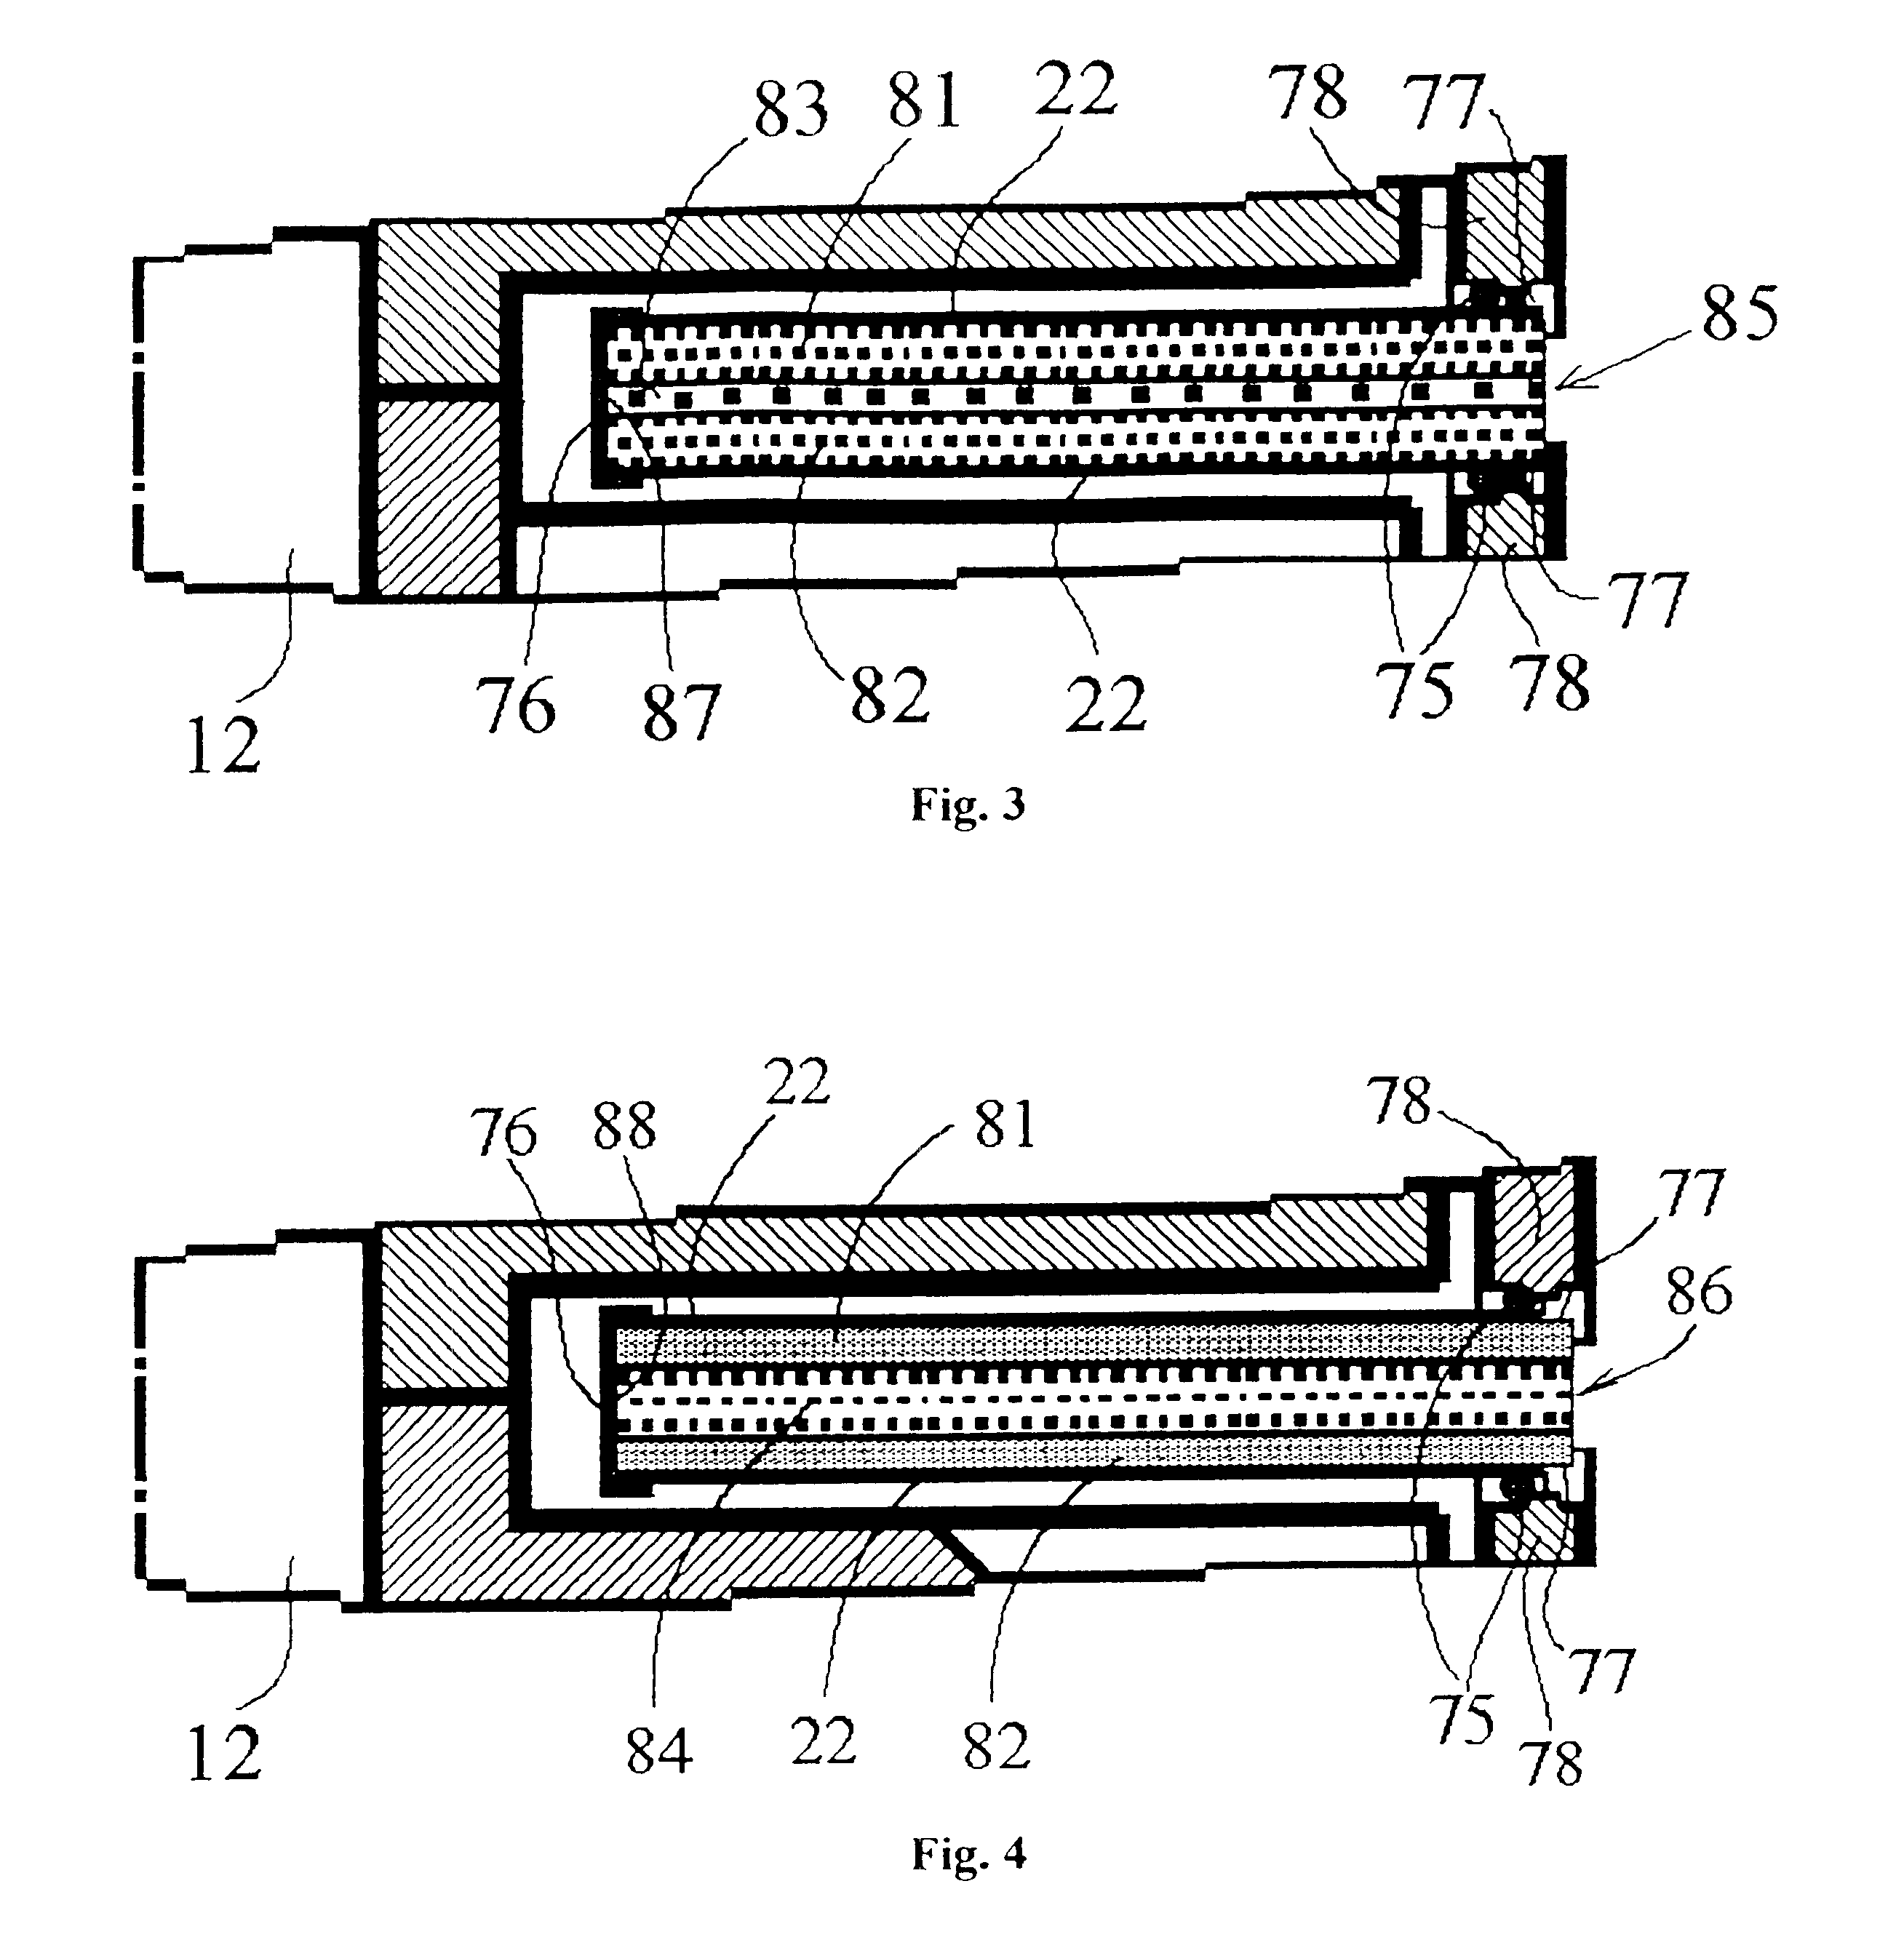 Apparatus, system and method for separating liquids